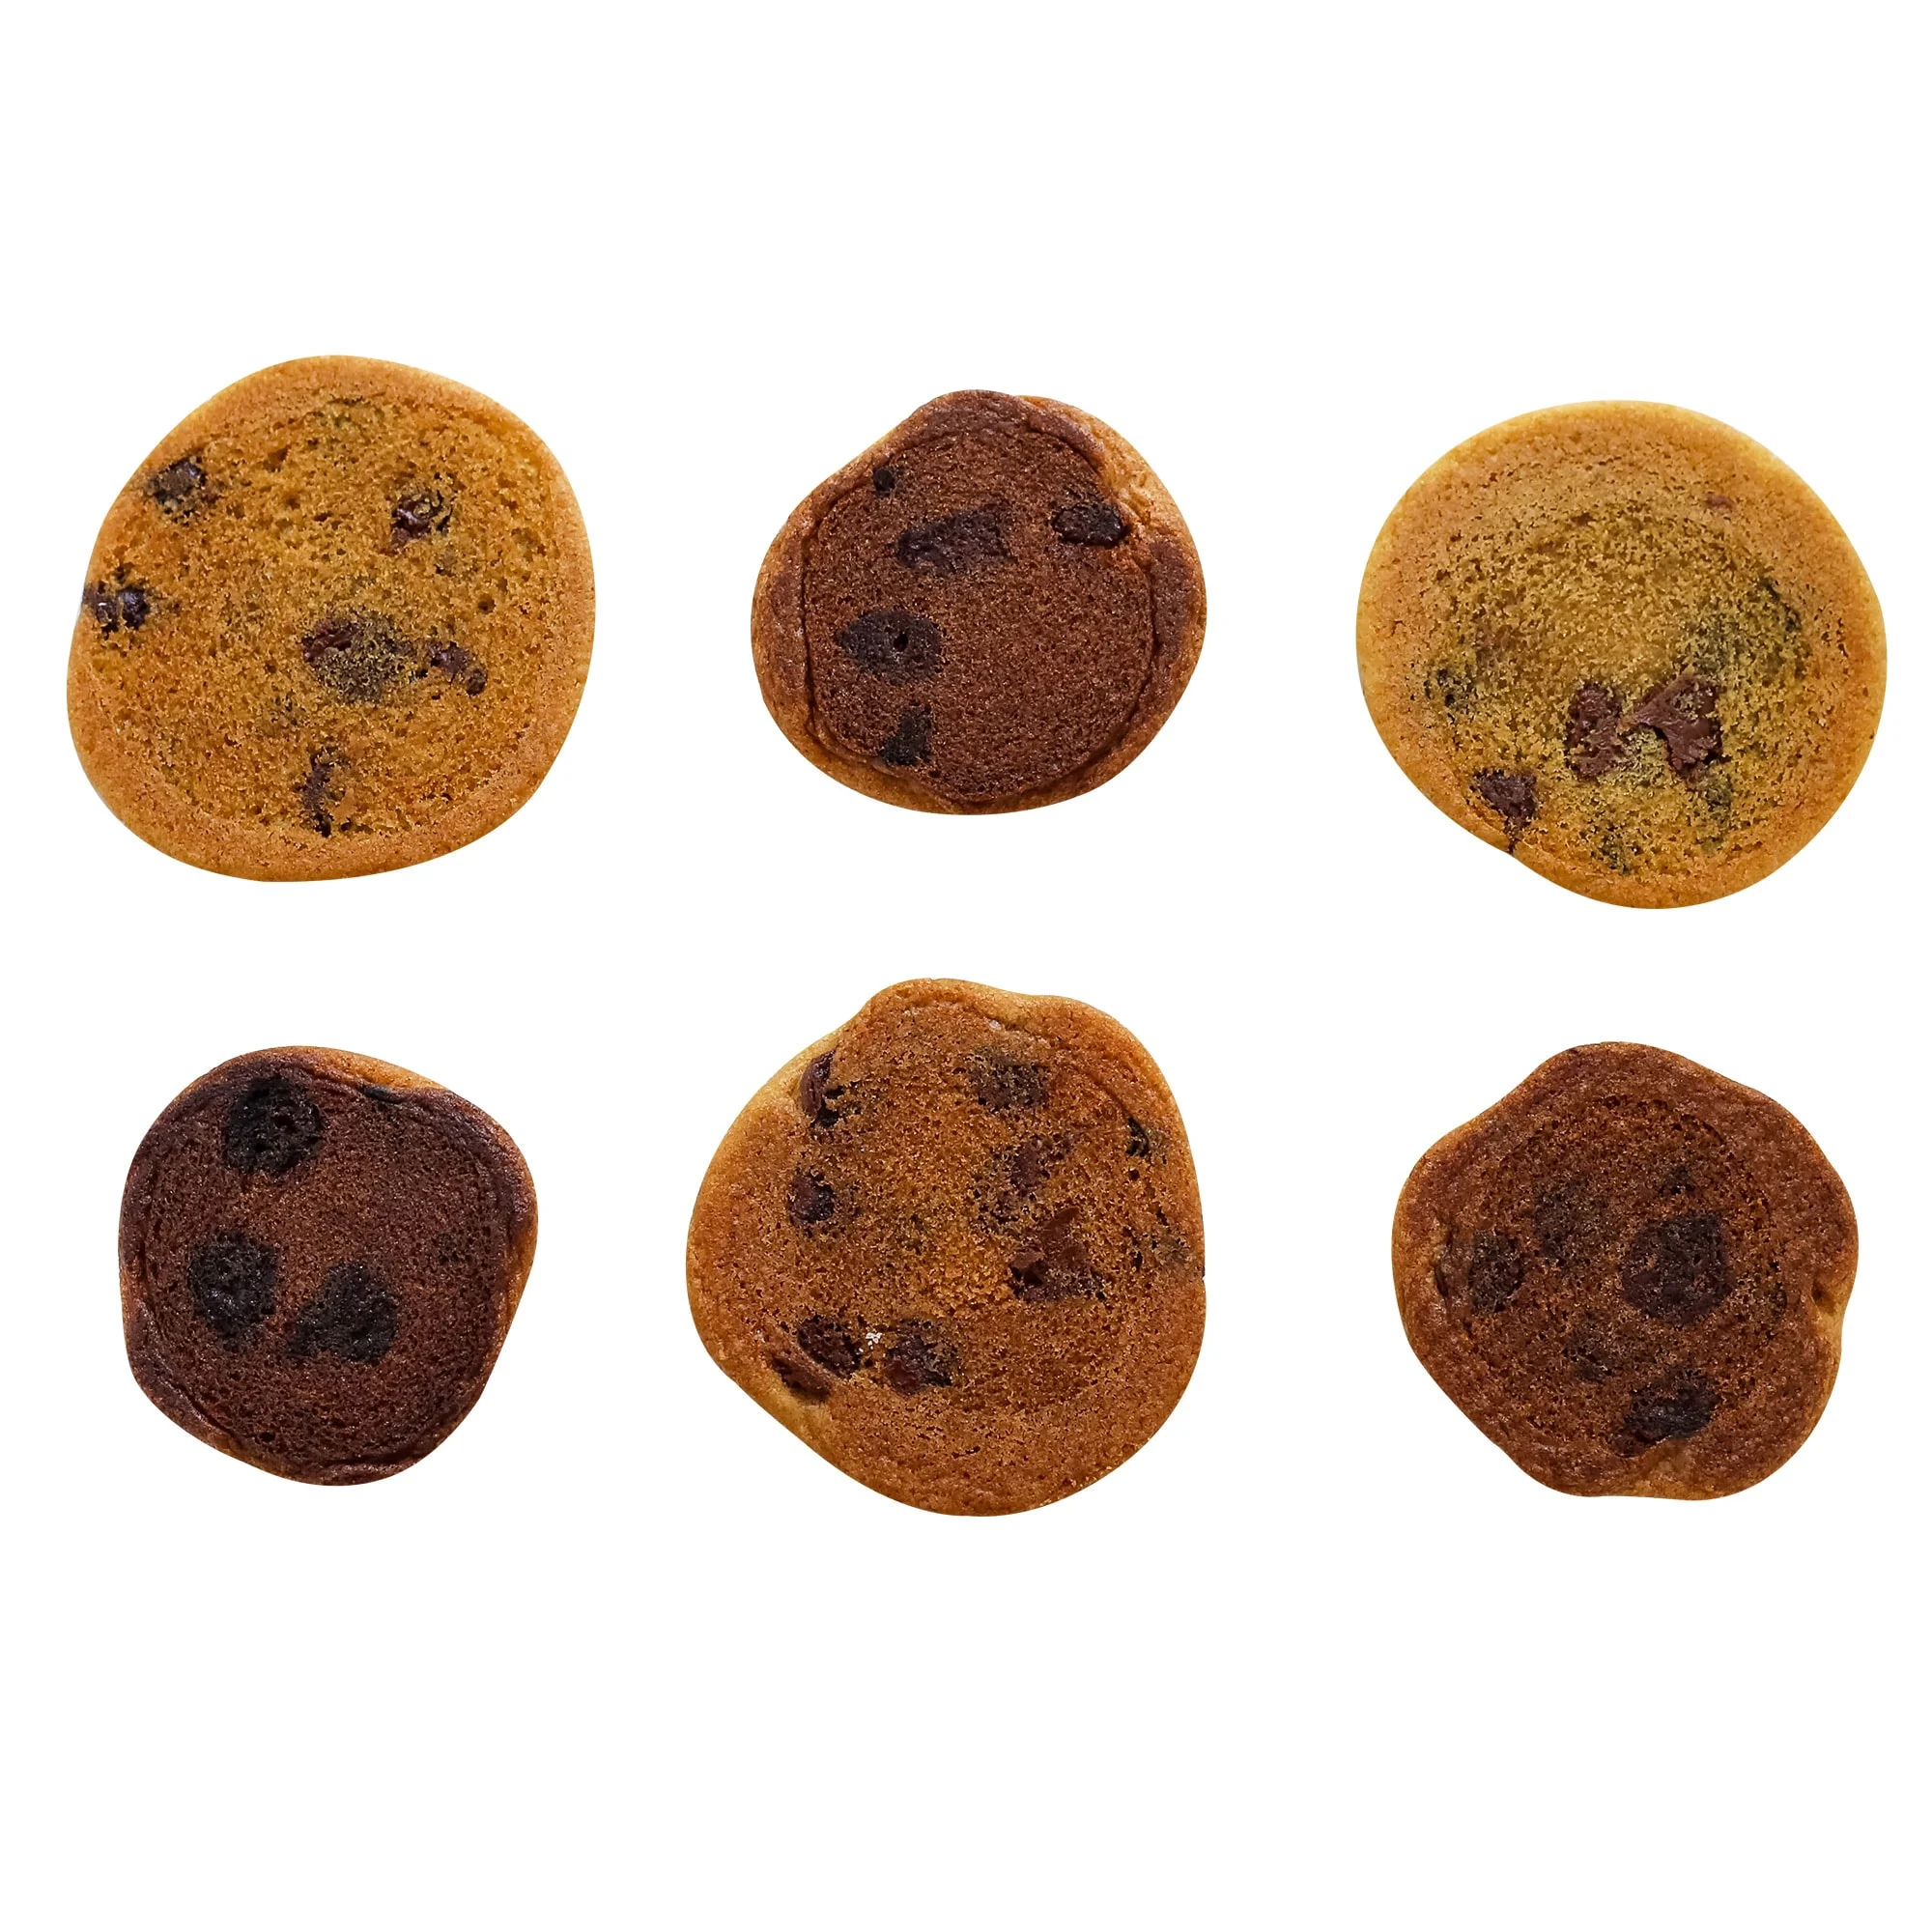 six cookies from the same batch of dough - the only difference is the pan they were baked on. Some are pale, some are burned and some are perfectly golden brown